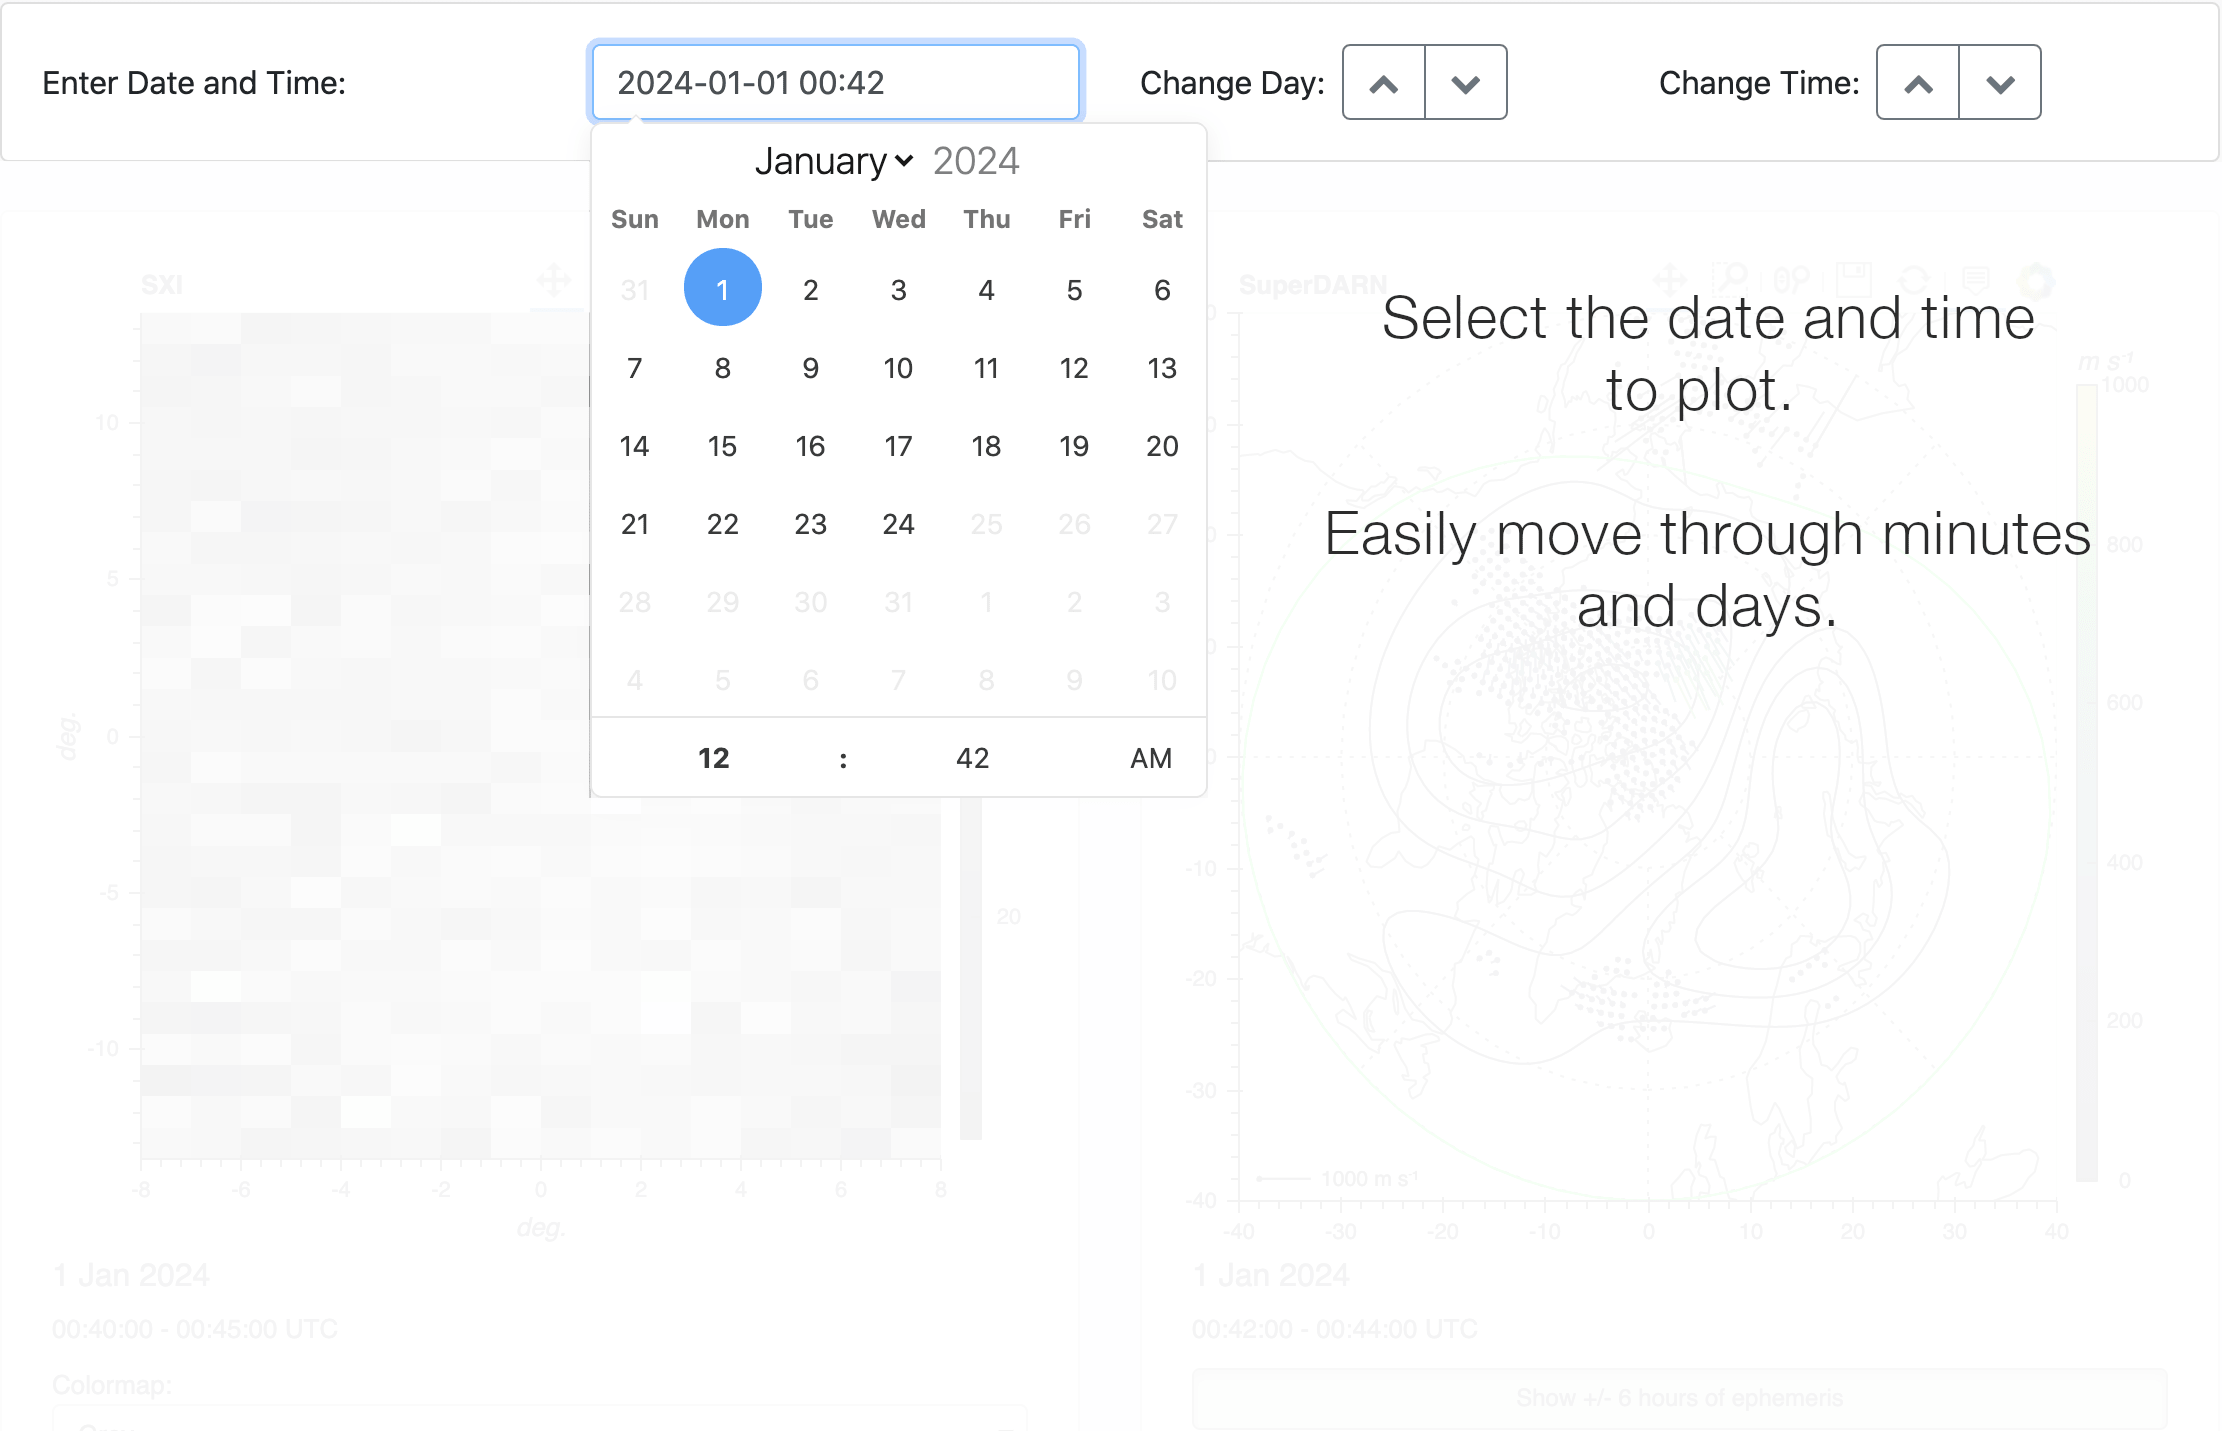 Select the date and time to plot